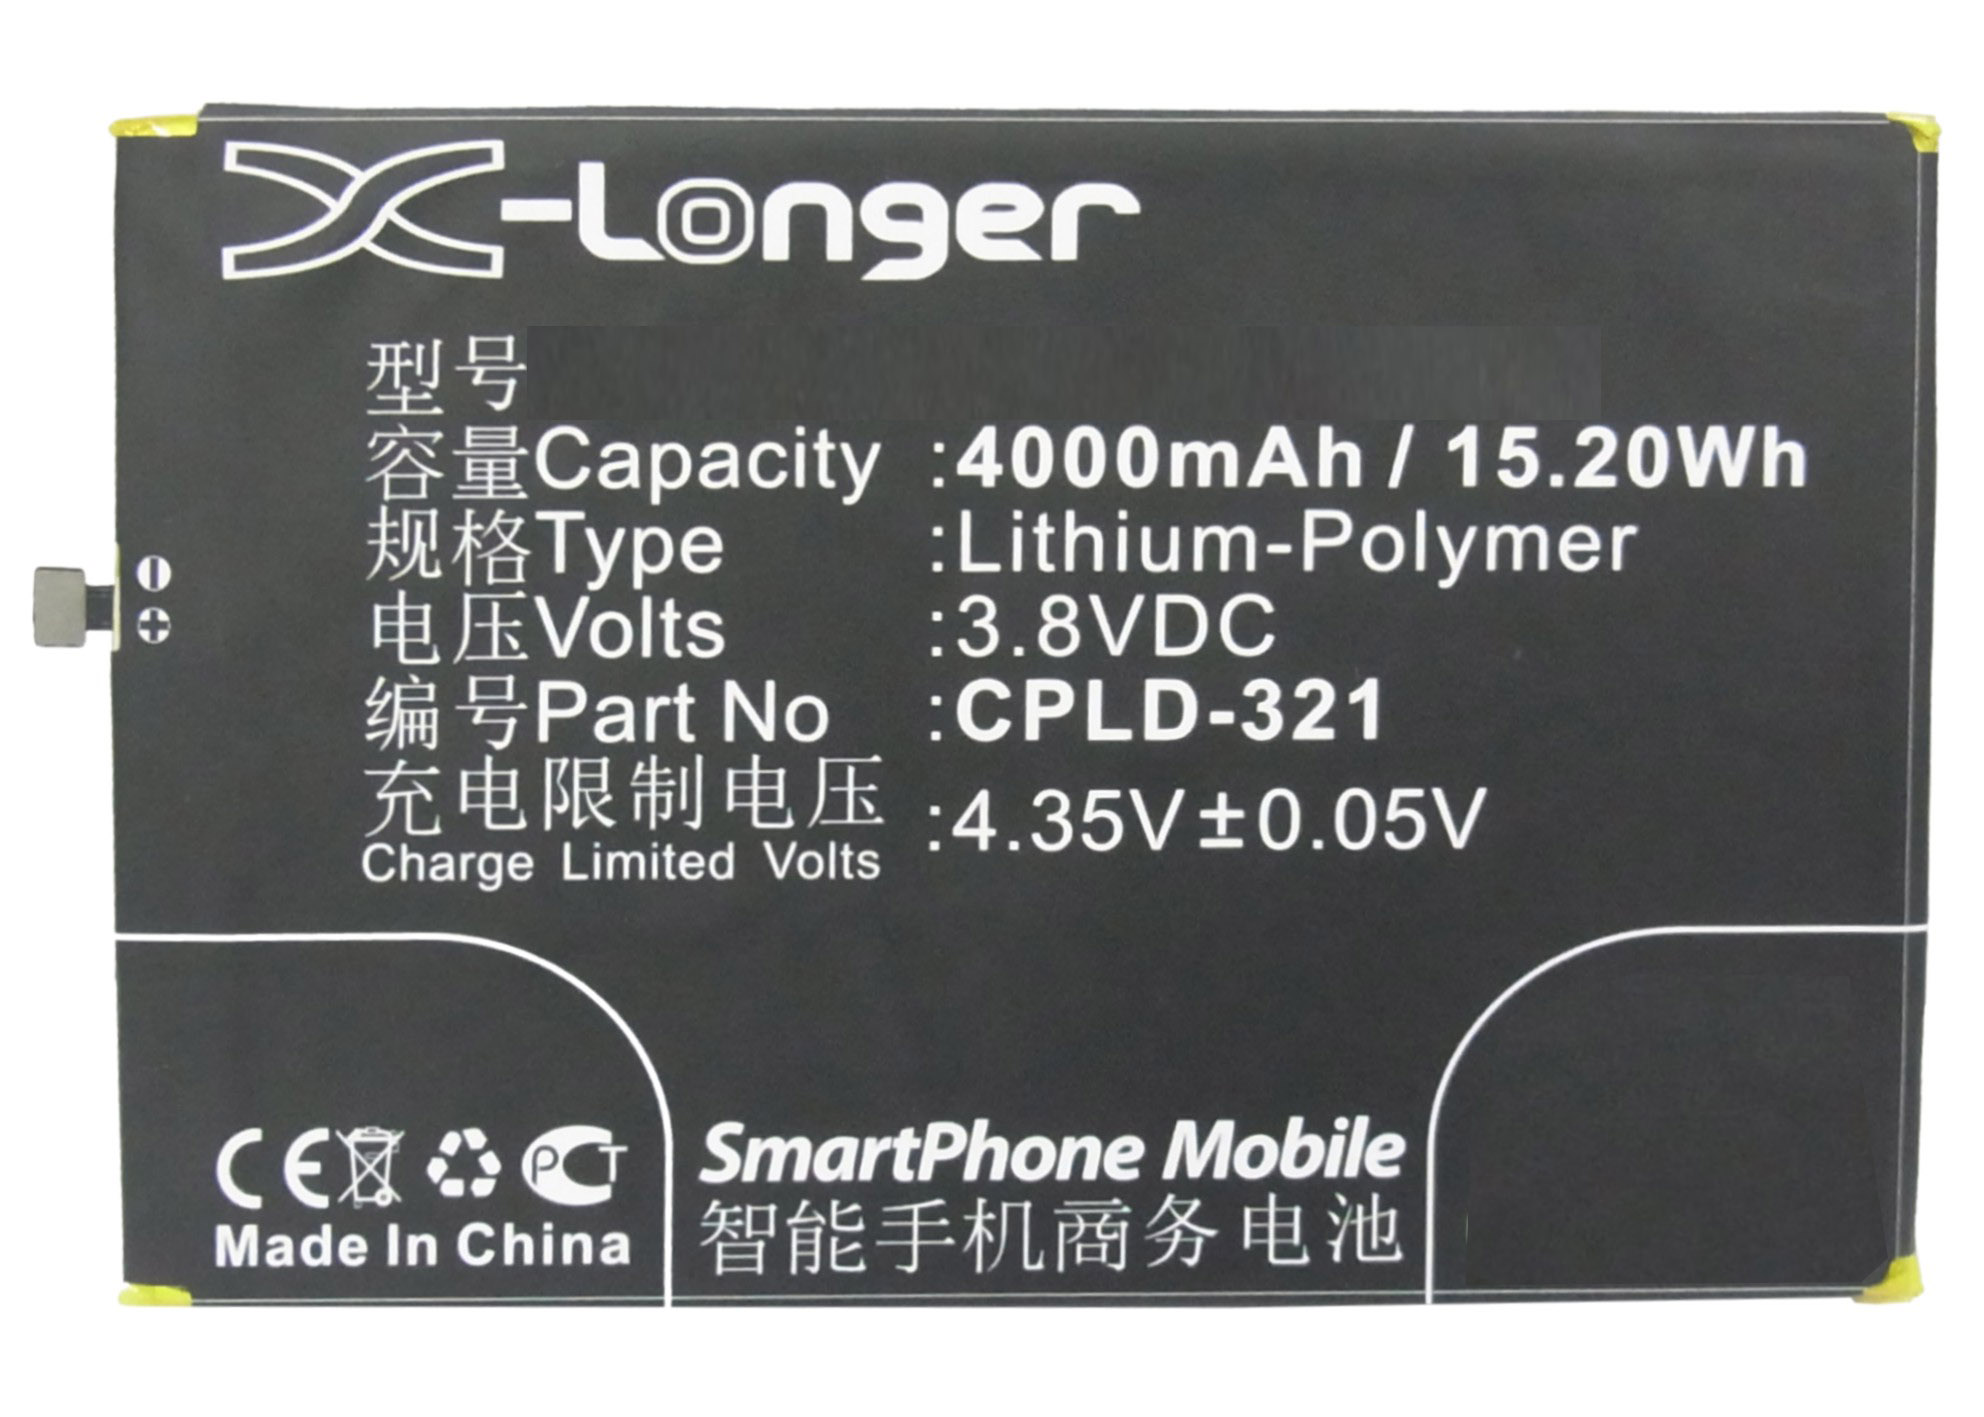 Synergy Digital Battery Compatible With Coolpad CPLD-317 Cellphone Battery - (Li-Pol, 3.8V, 4000 mAh / 15.20Wh)